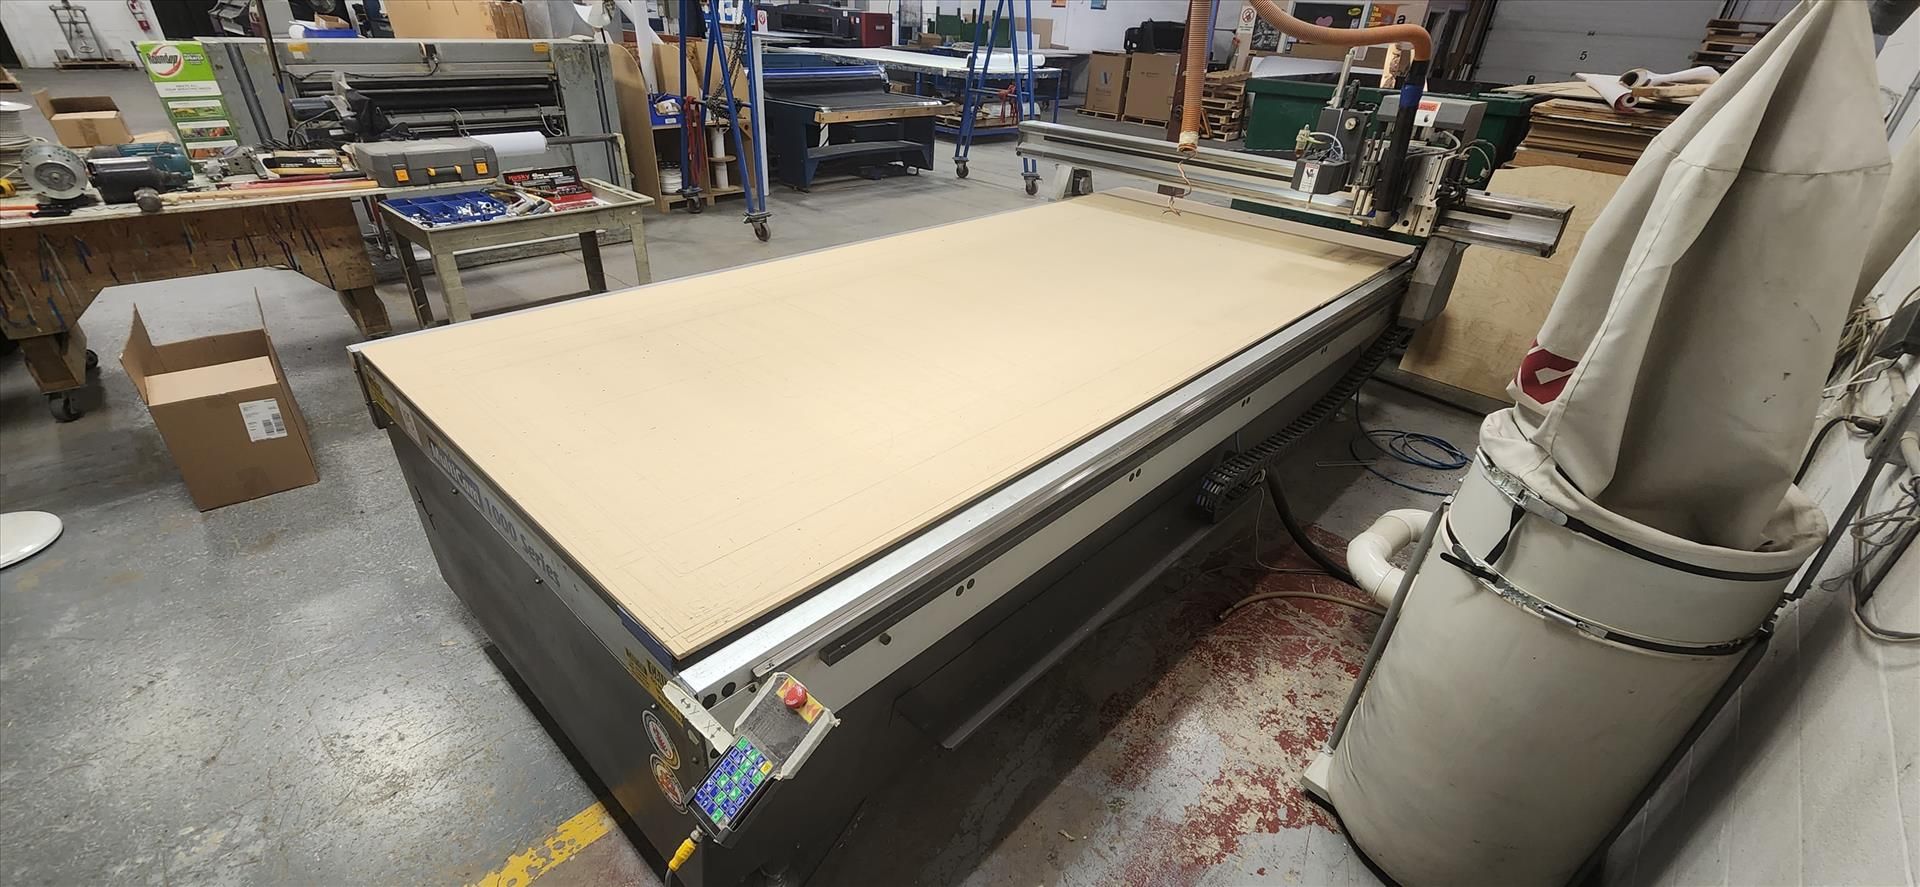 MultiCam 1000 Series CNC router, ser. no. 1-204-R06788 (2008), 61 in. x 145 in. table, c/w 12.6 kw - Image 2 of 2